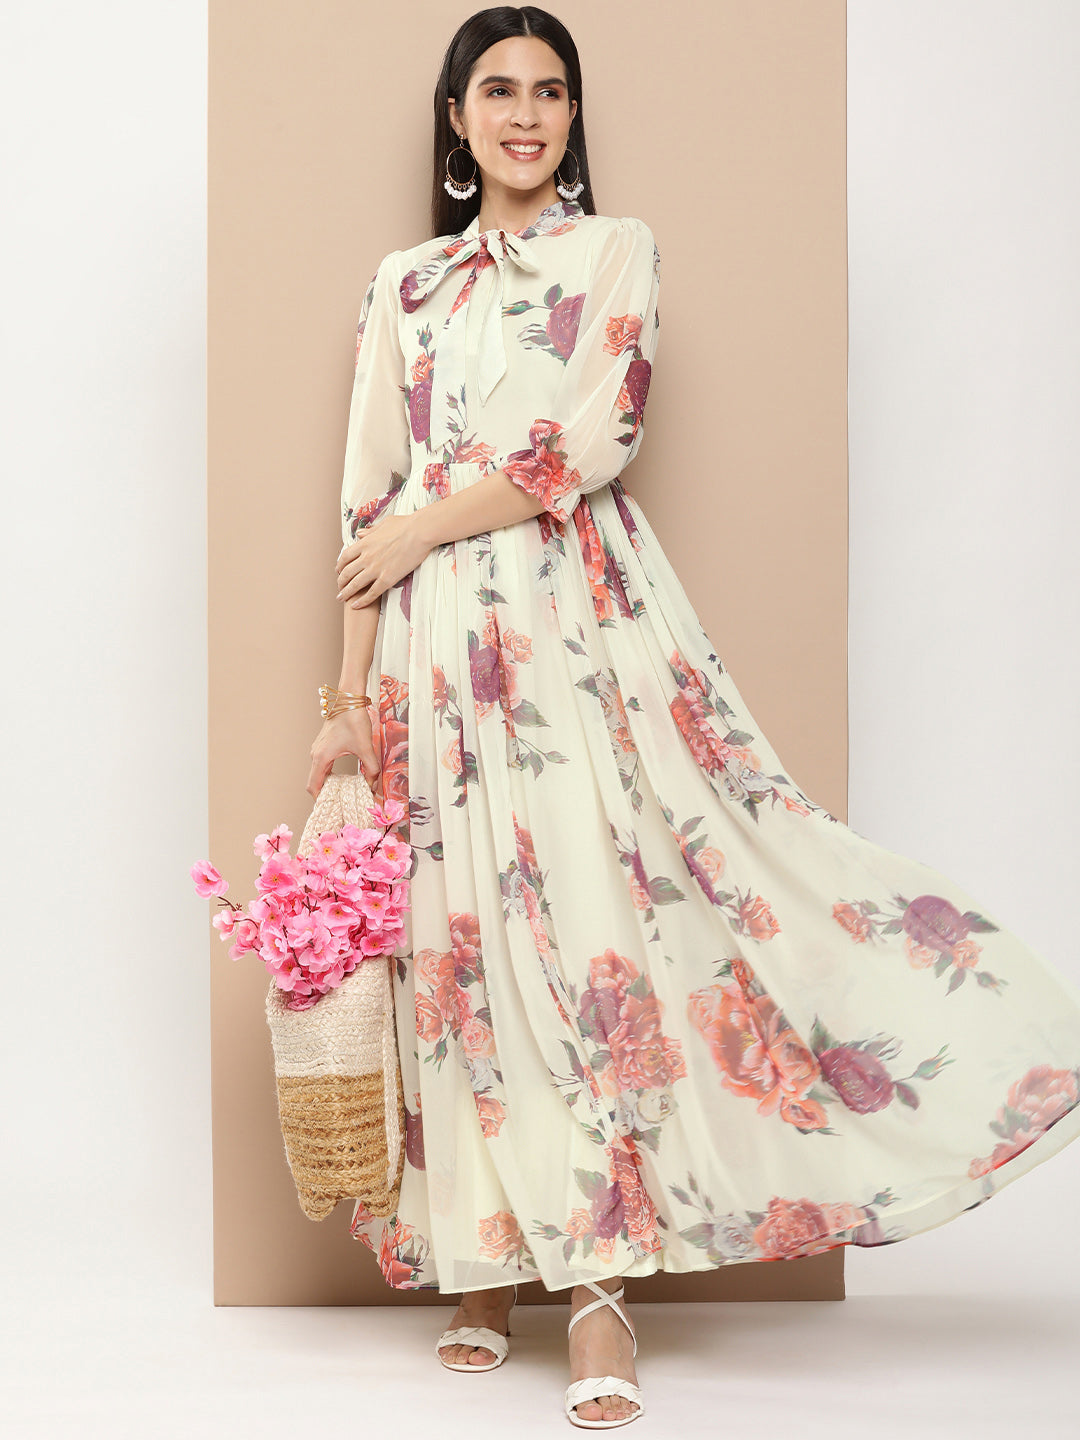 Women's Off White Printed Long Dress With Waist Belt - Bhama Couture